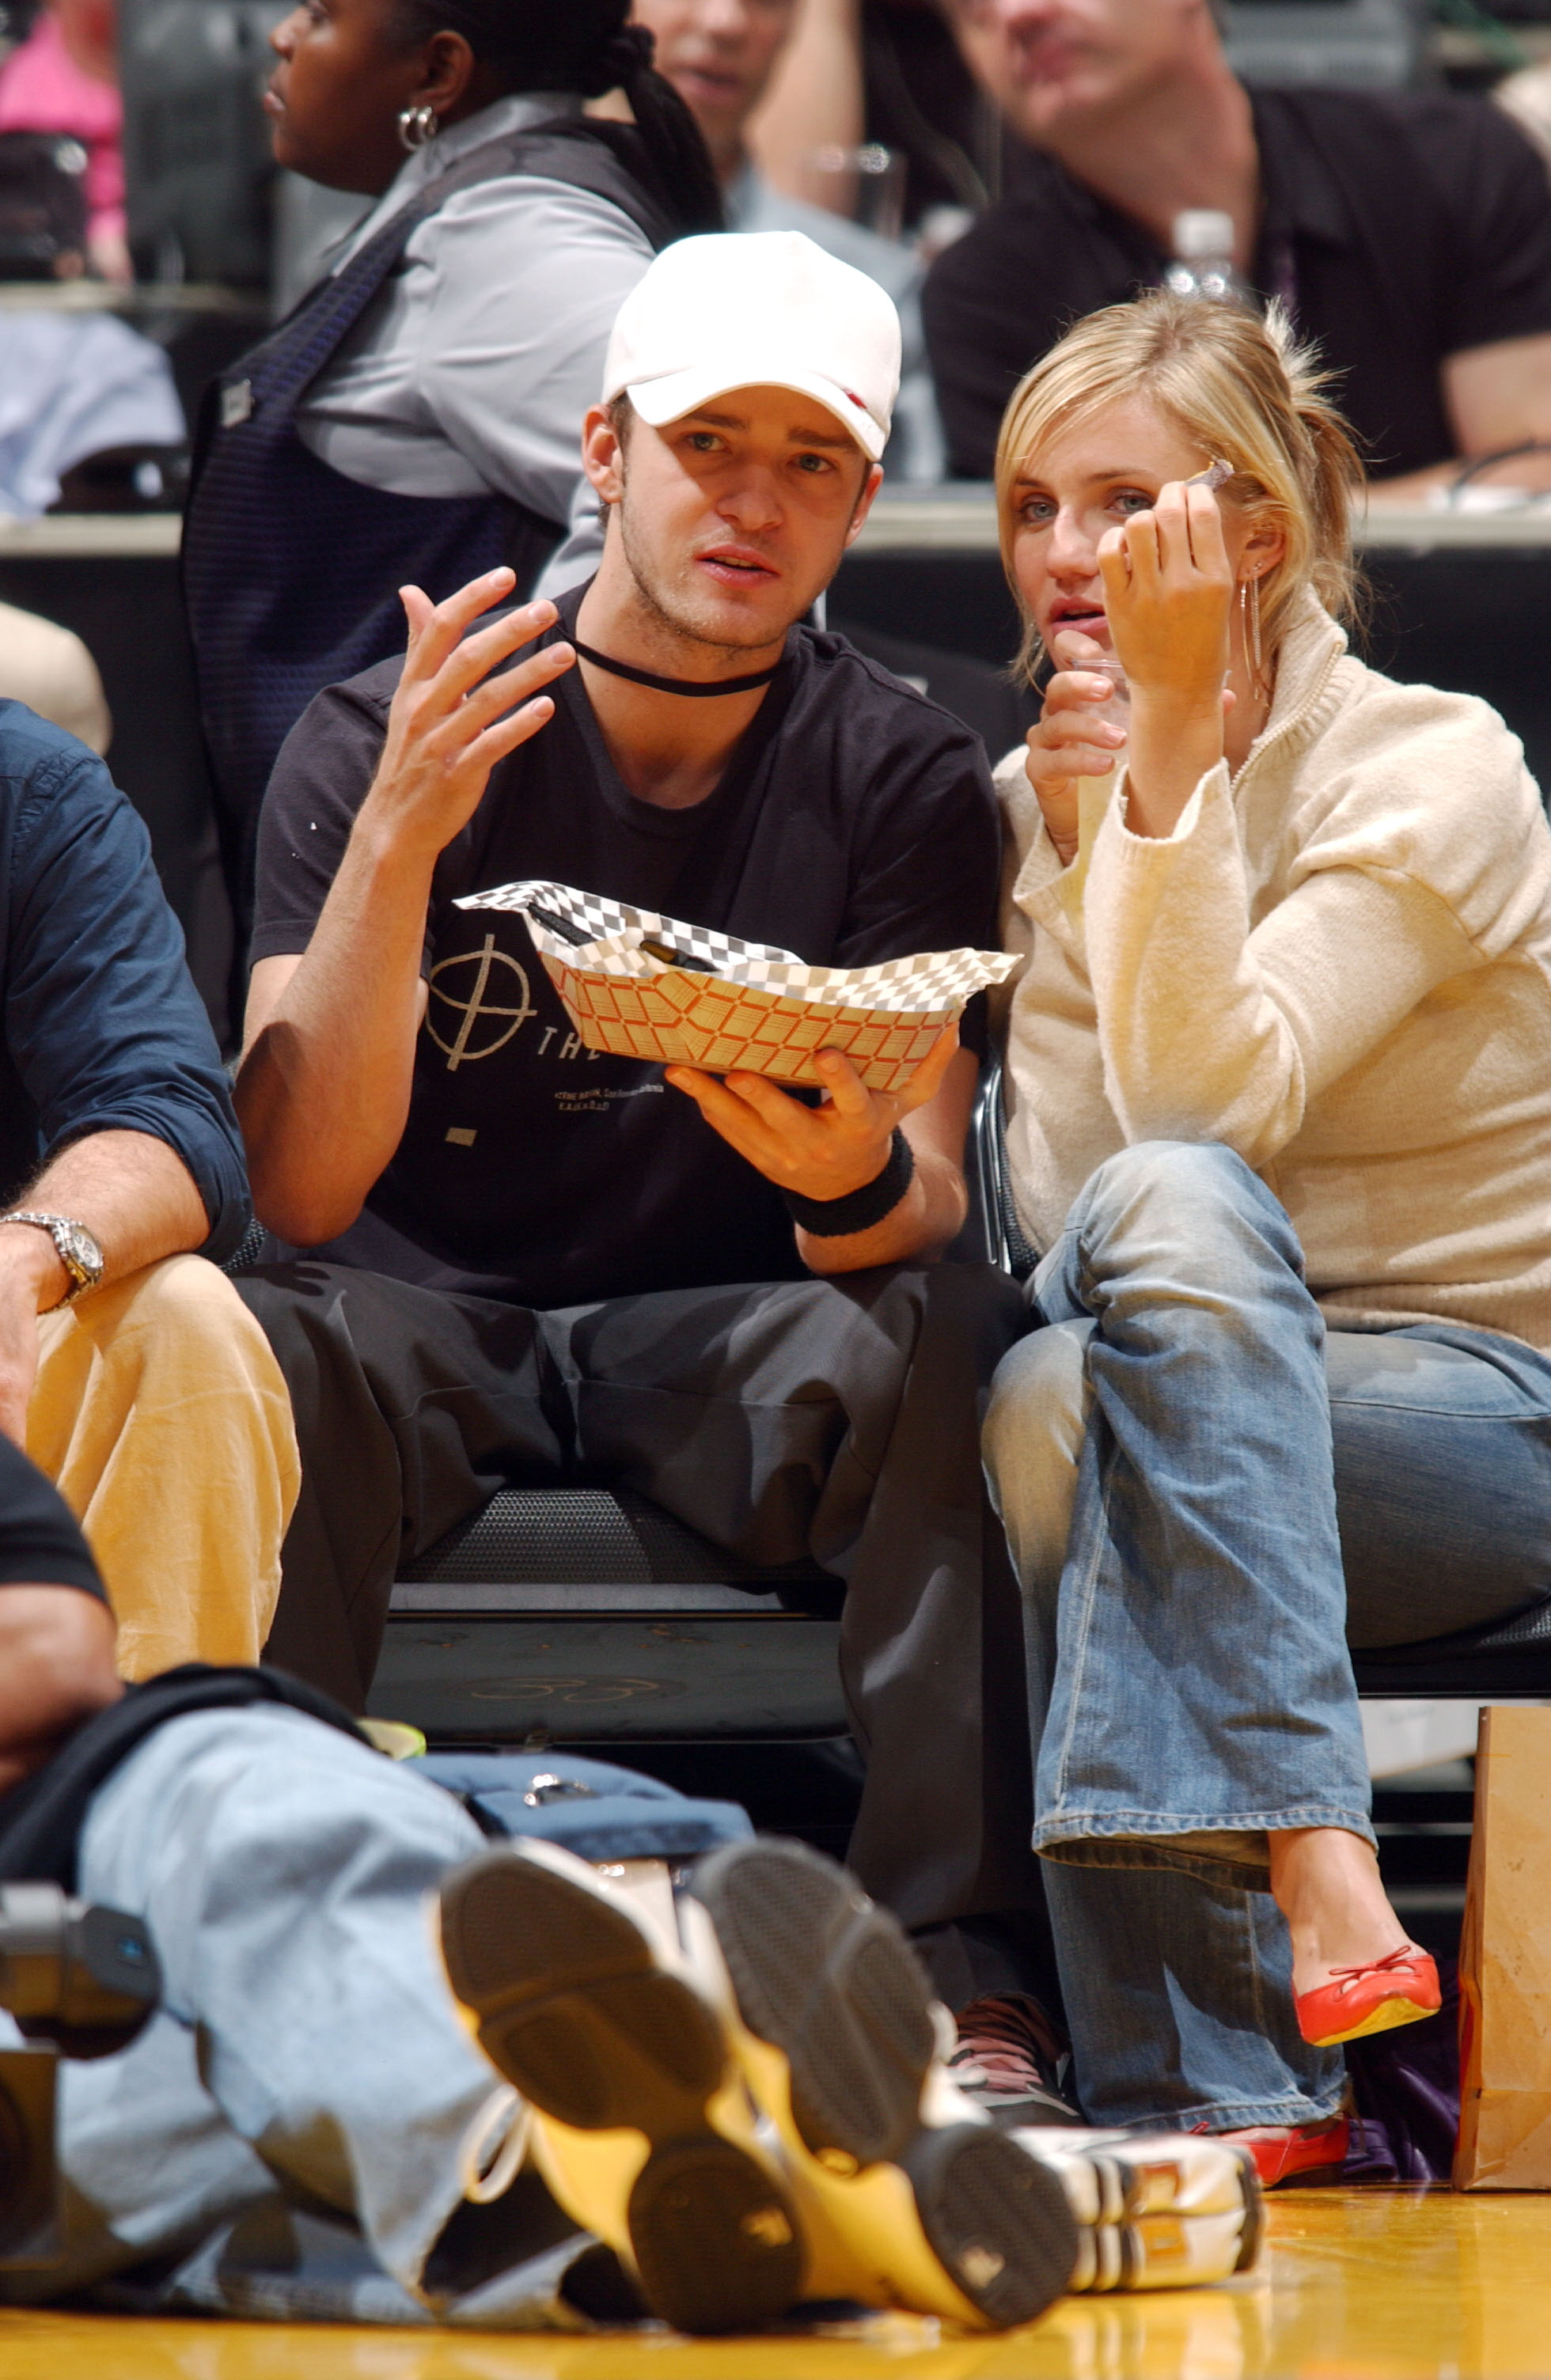 Justin Timberlake and Cameron Diaz watching a game between the Los Angeles Lakers and the Dallas Mavericks in Los Angeles, California on October 28, 2003 | Source: Getty Images